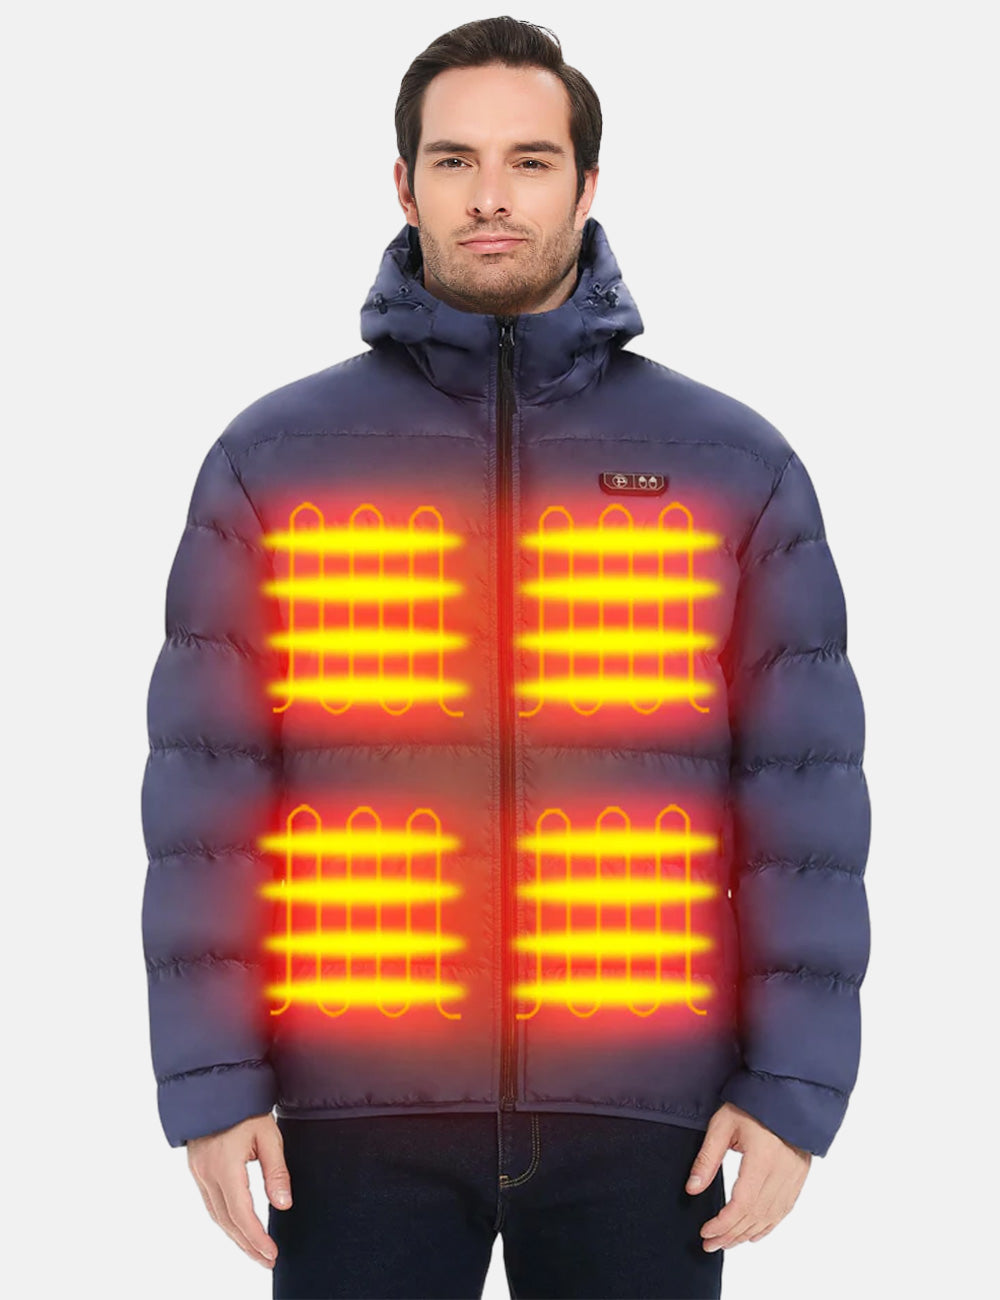 PTAHDUS Men’s 5-Zone Heated Jacket with Battery Pack 7.4V